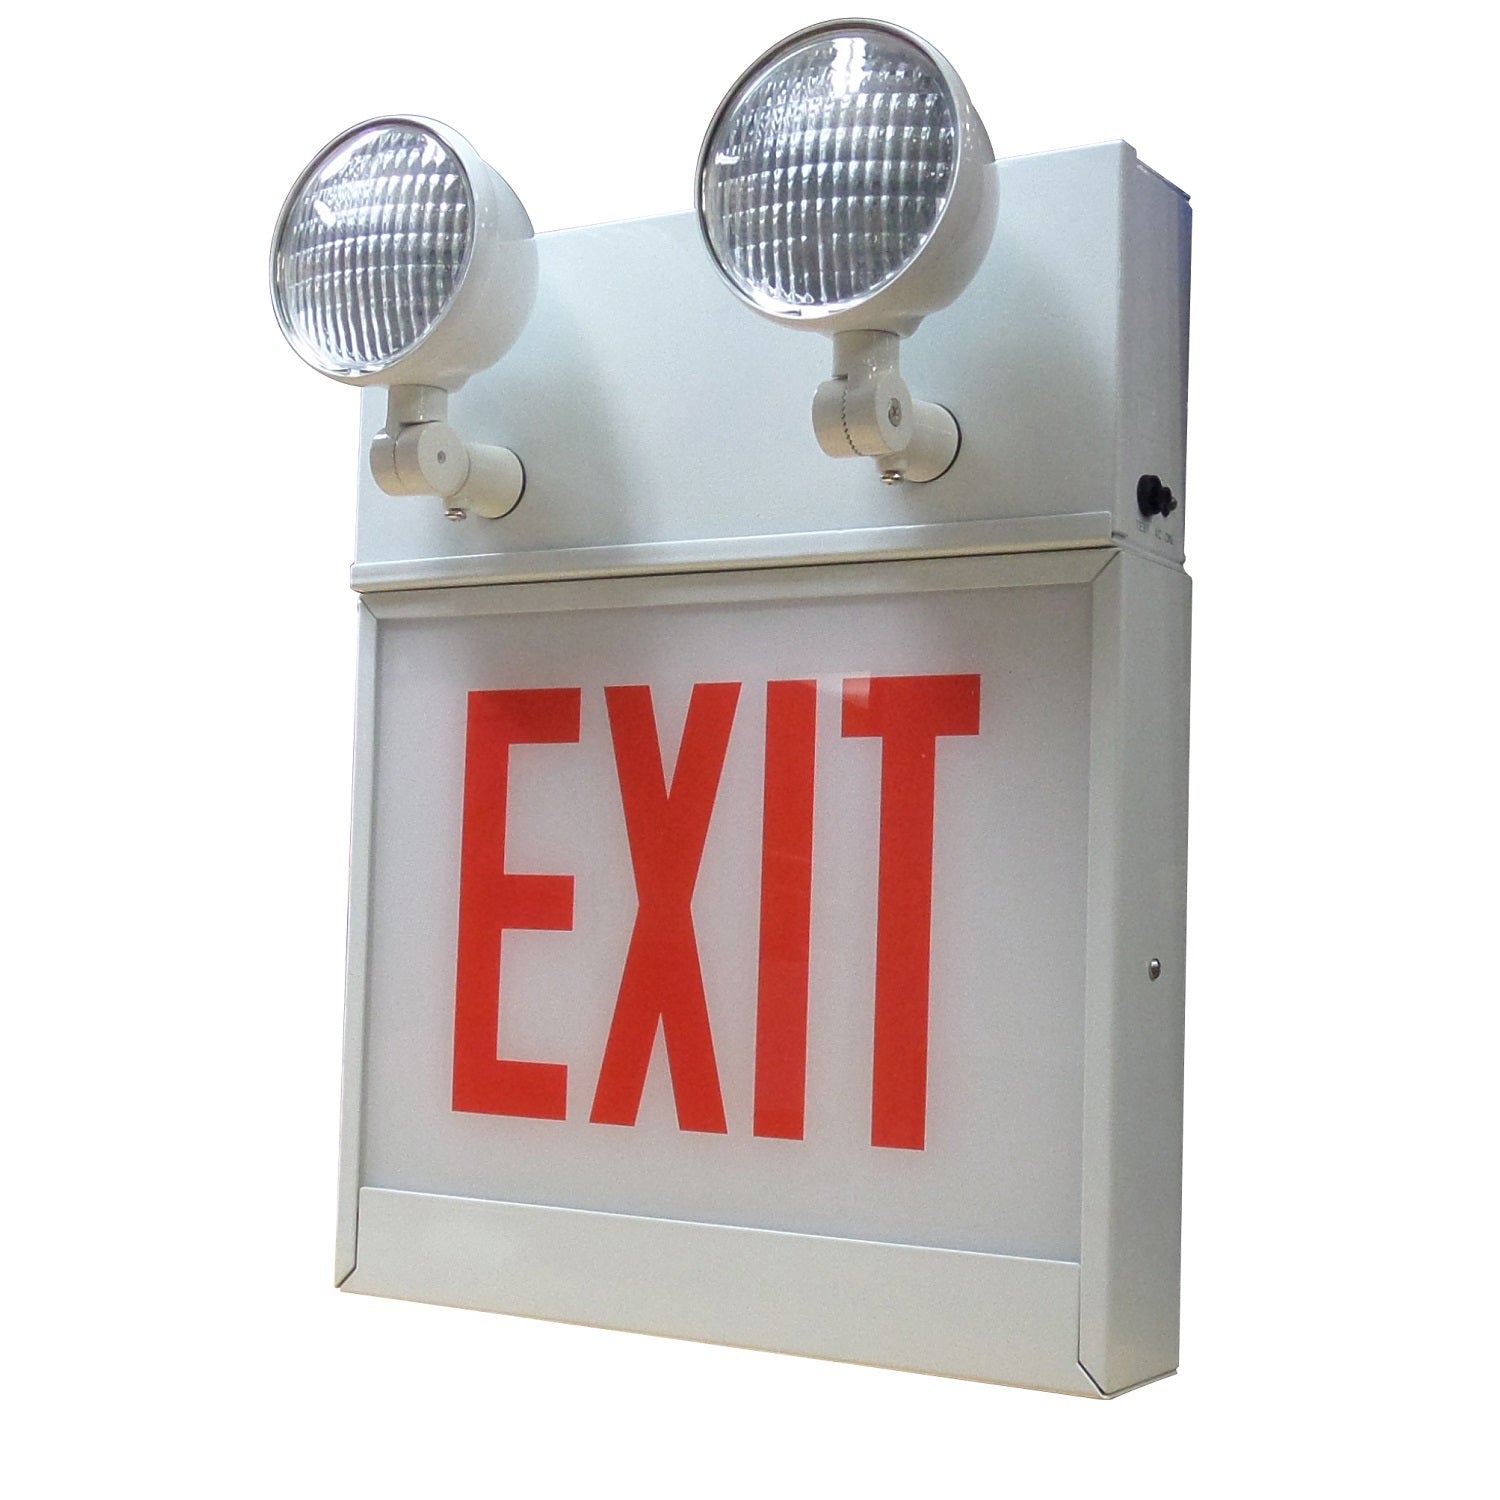 Chicago approved Steel Combo Sign with Emergency Lights - Minute Battery Exit Sign Warehouse